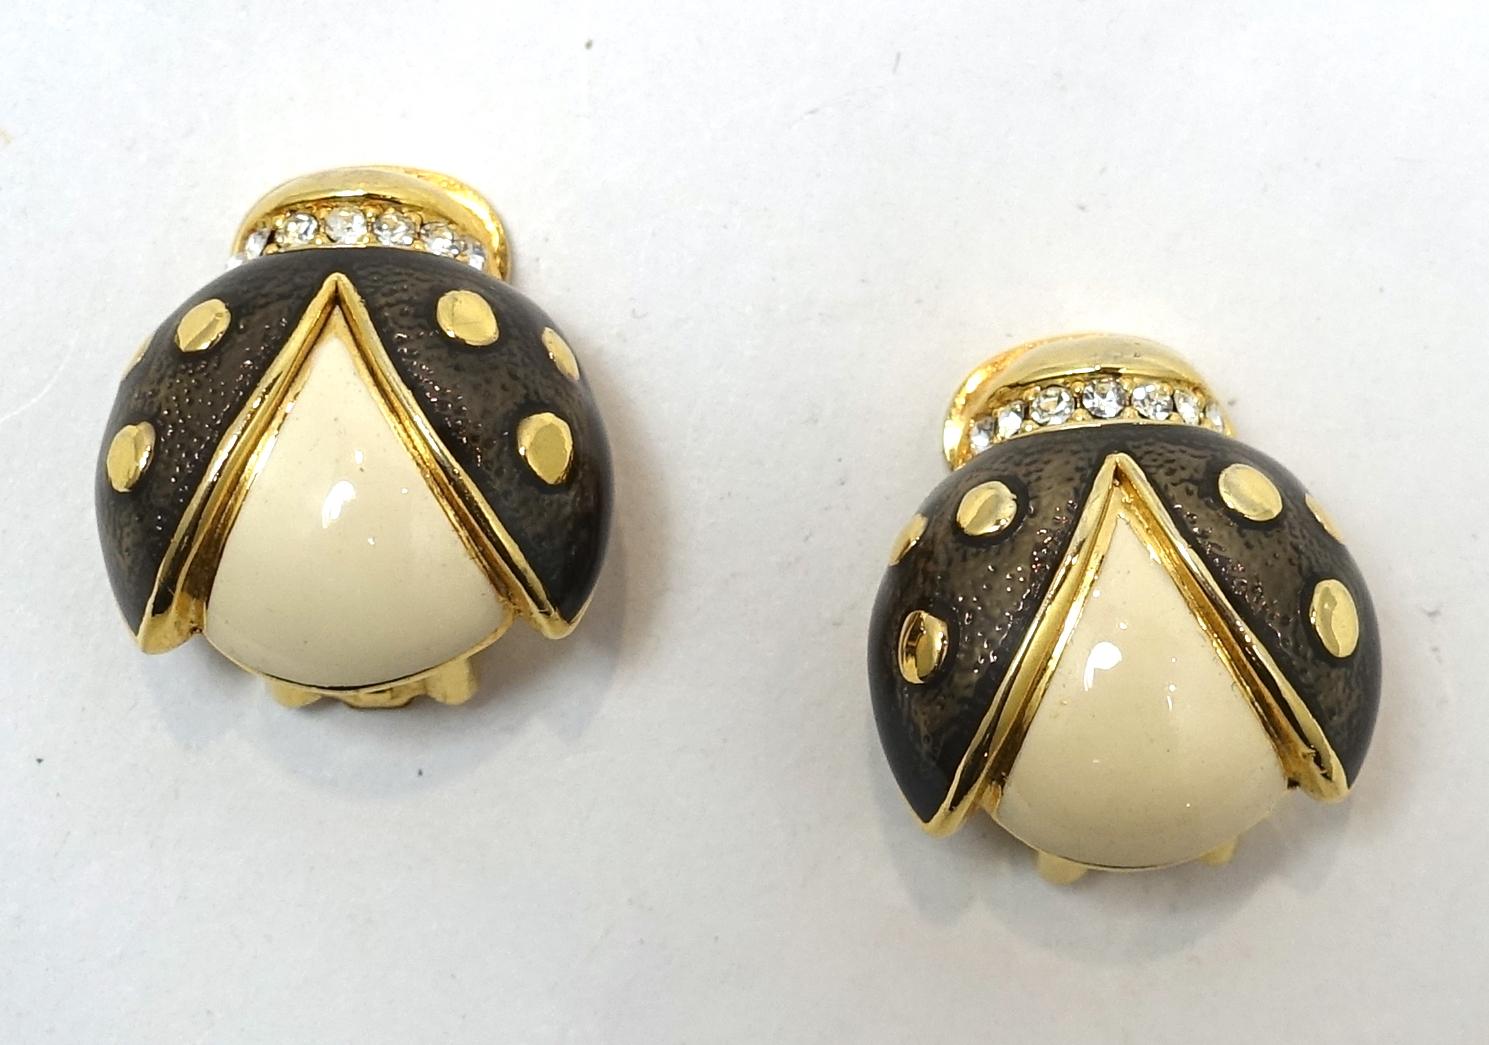 Vintage Enamel & Crystal Ladybug Earrings In Good Condition For Sale In New York, NY